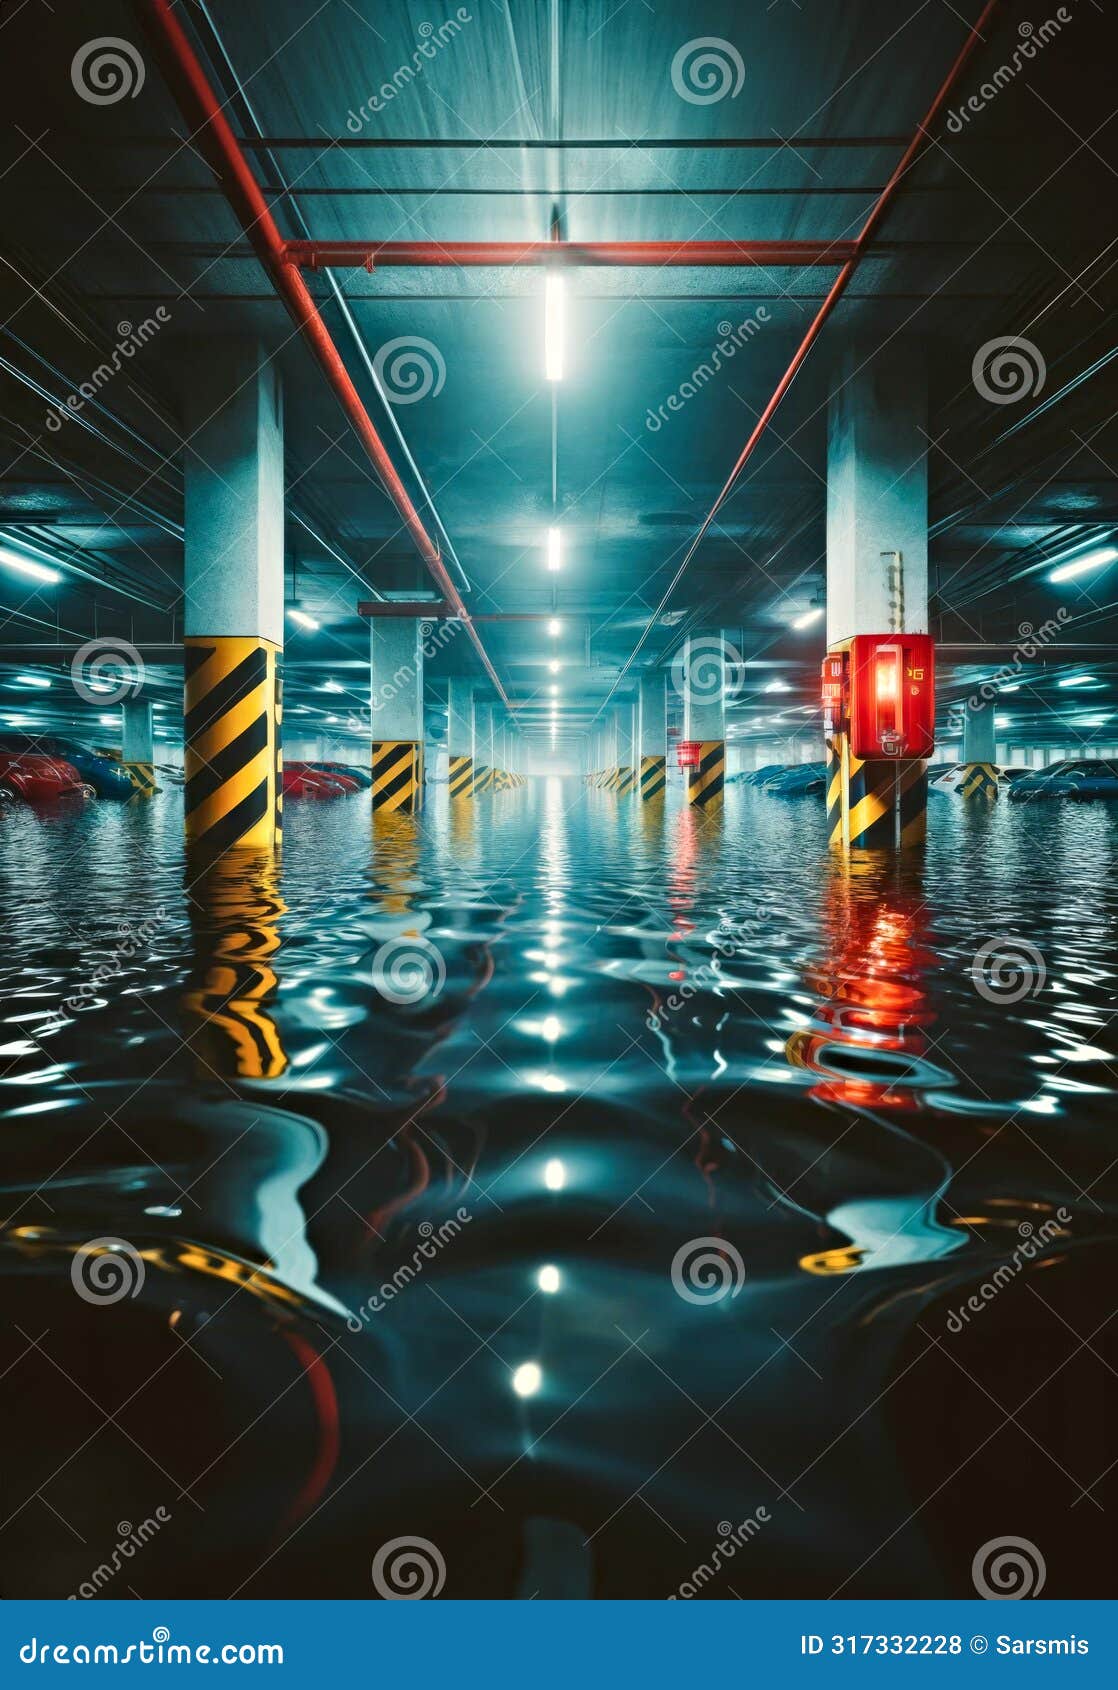 underwater parking lot. submerged cars in flooded parking. flood consequences. concept climat change